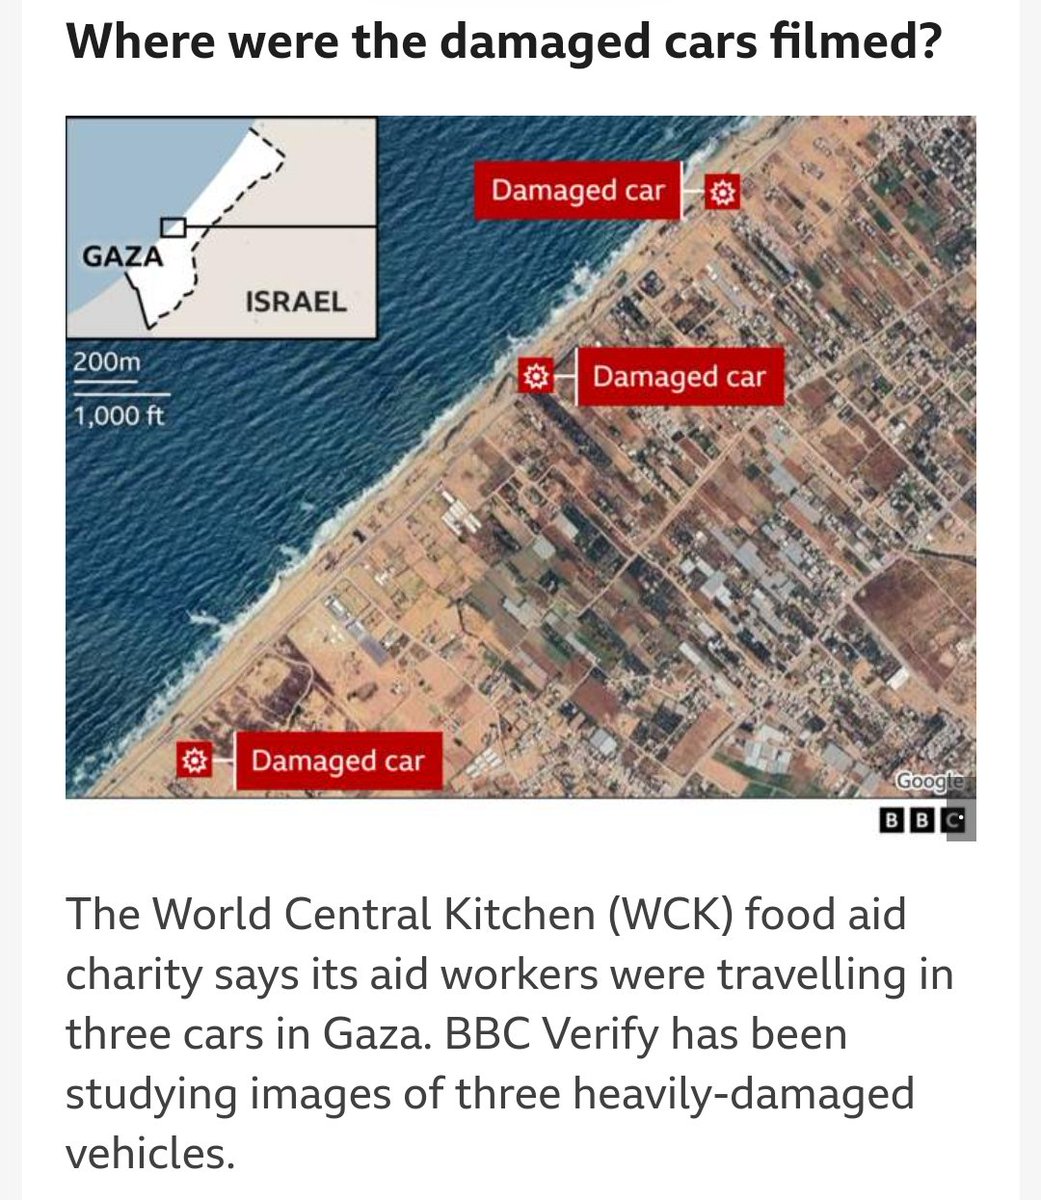 How is it possible to 'accidentally' bomb 3 separate cars 1.5 miles apart? Surely this would suggest that the aid workers in their charity branded vehicles were targeted unlawfully? Yet another war crime committed by Israel. #CeasefireNOW